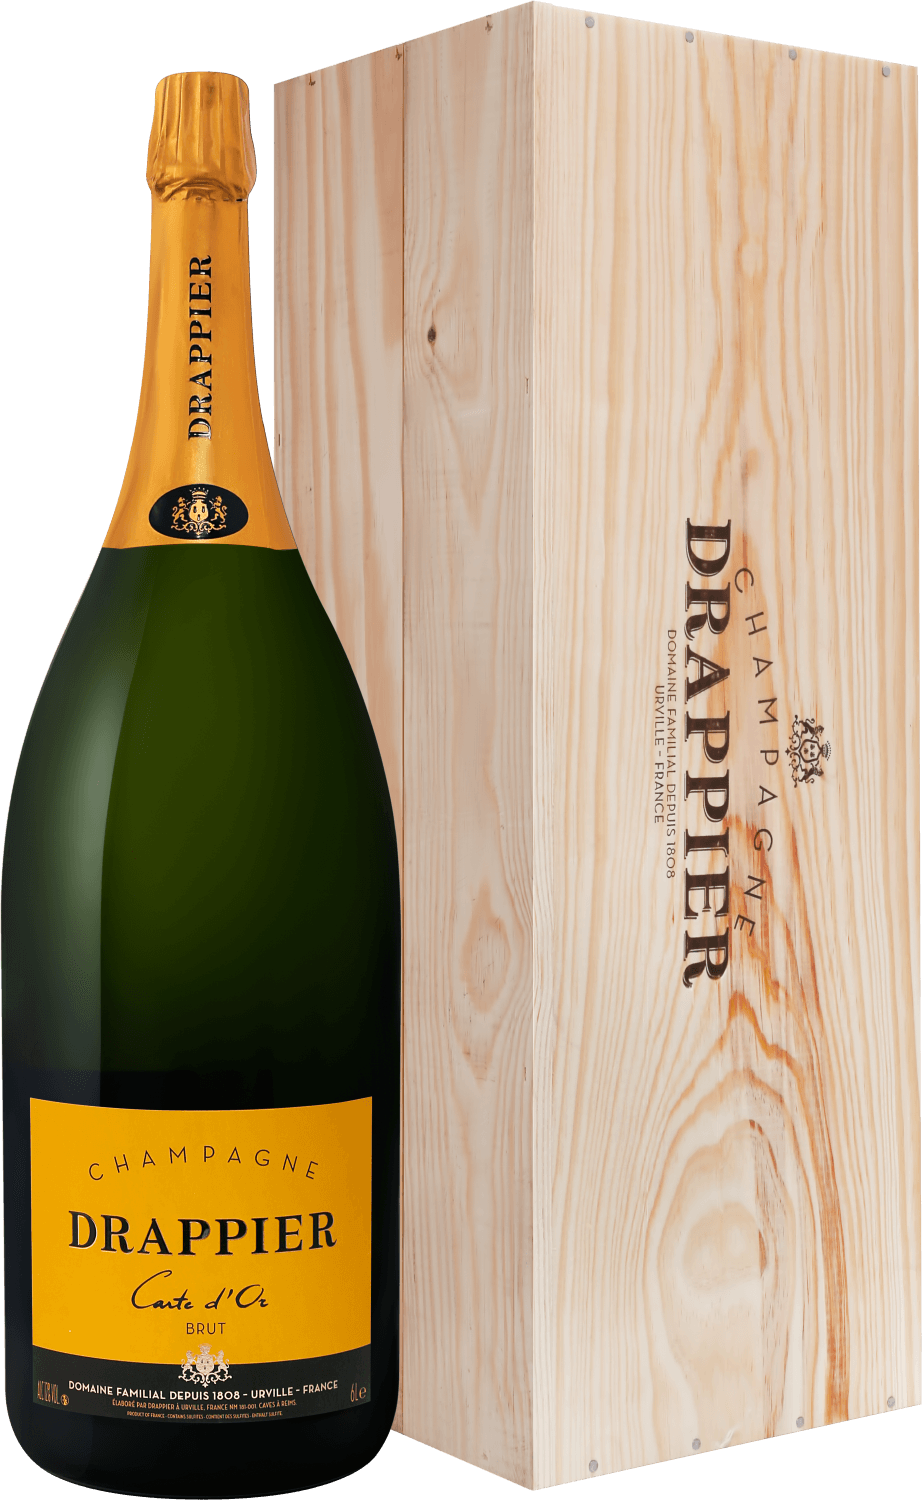 Drappier Carte d’Or Brut Champagne AOP in gift box pommery brut rose royal champagne aop gift box